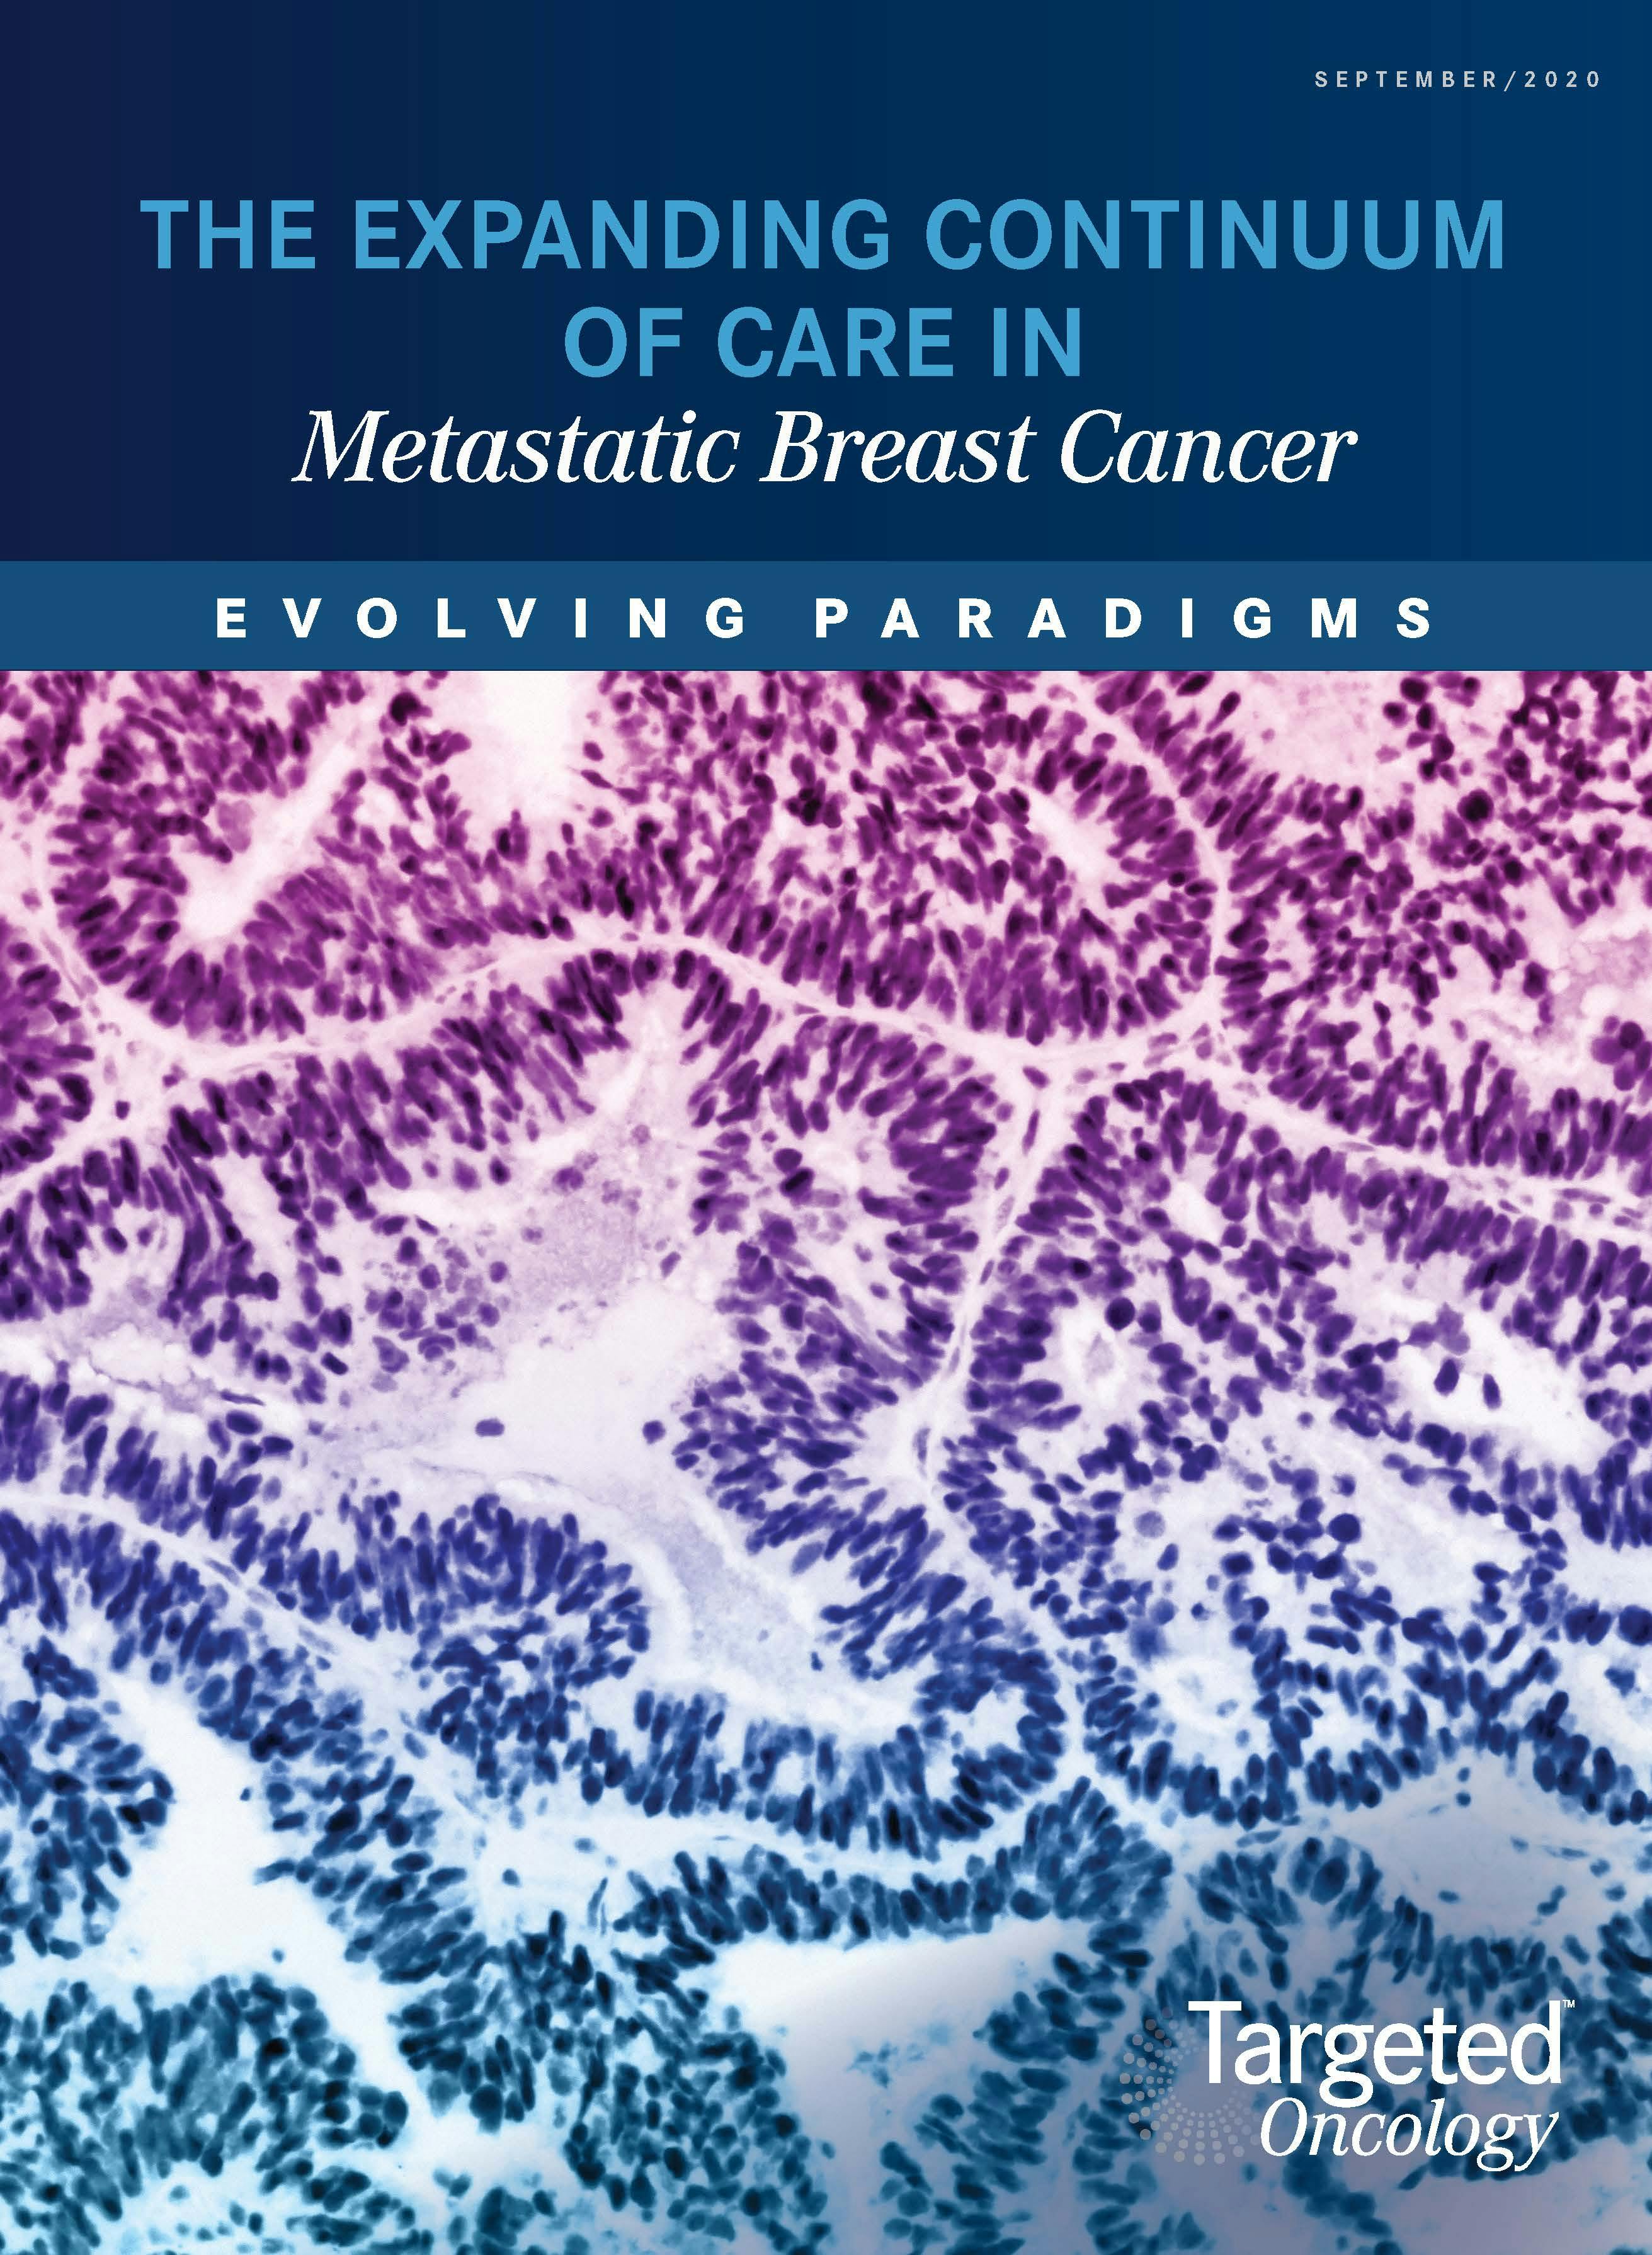 The Expanding Continuum of Care in Metastatic Breast Cancer